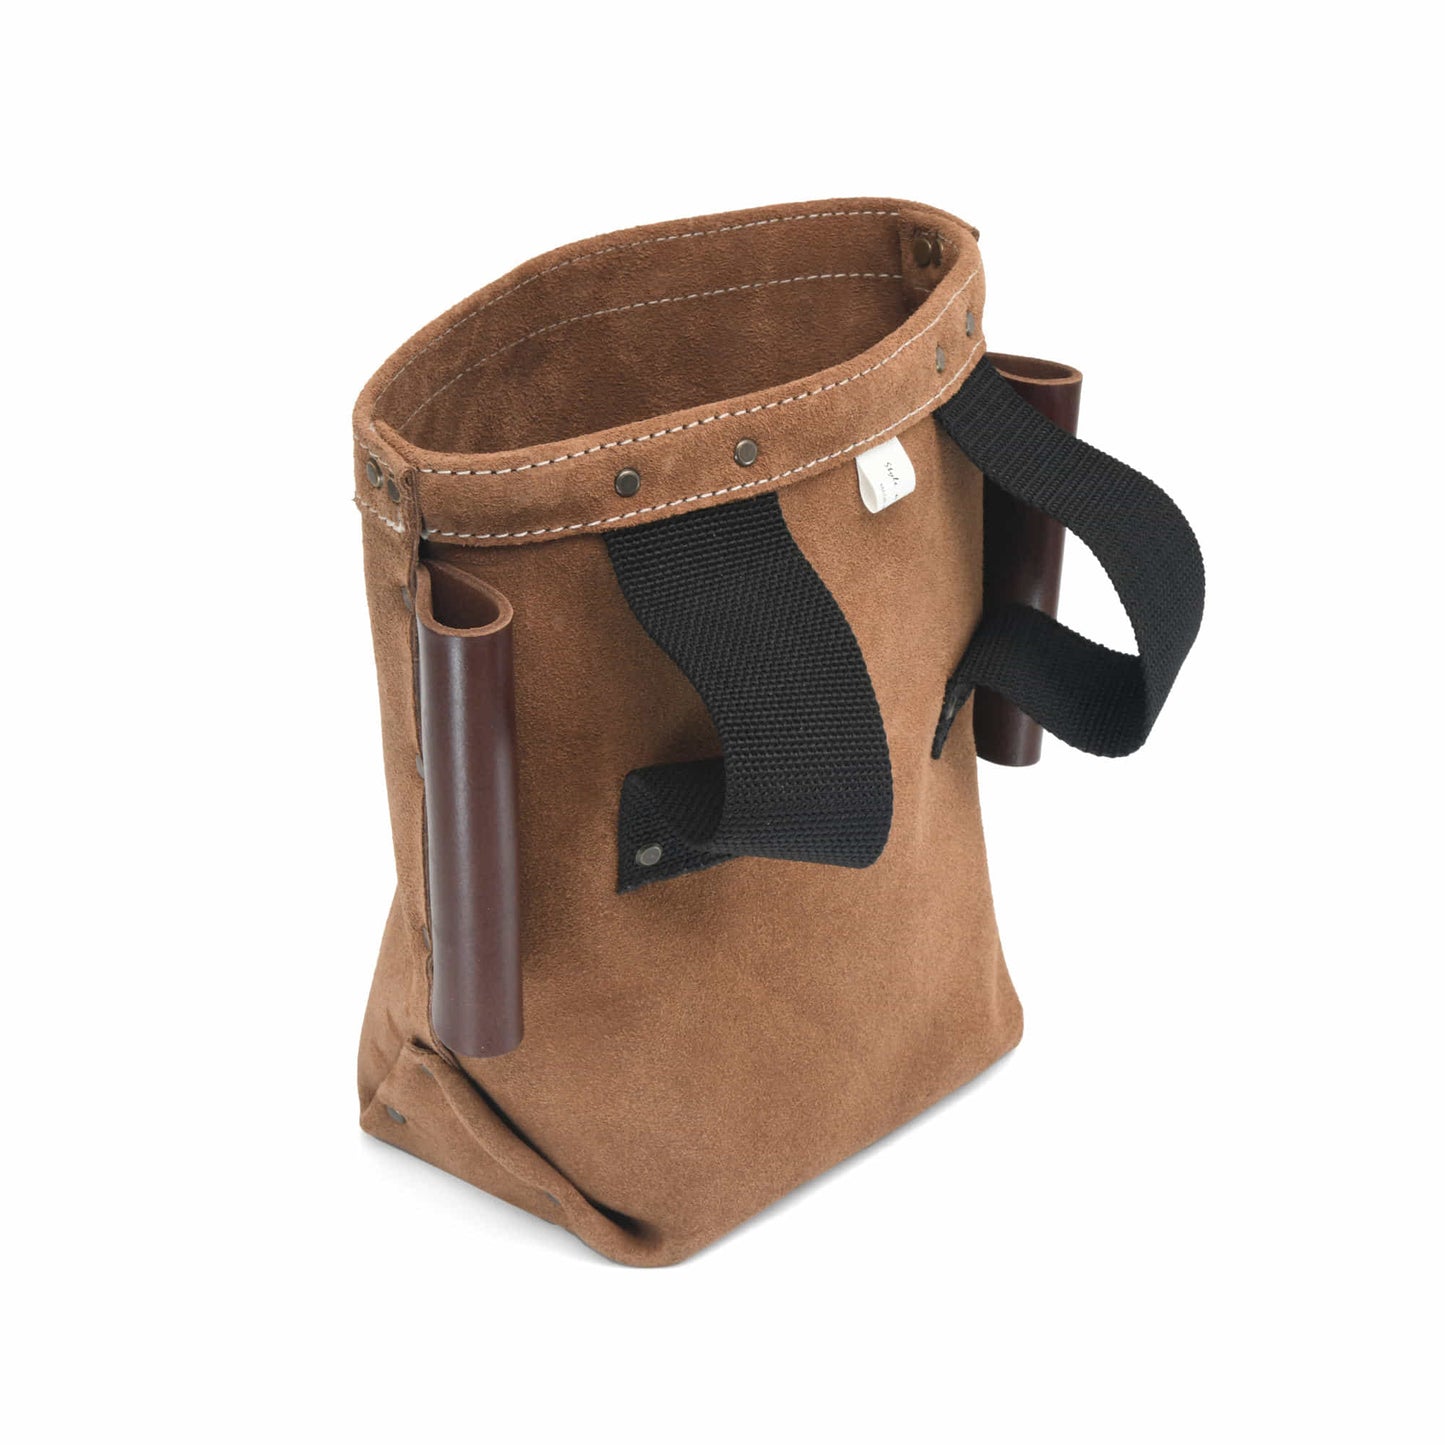 Style n Craft 88515 - Iron Worker's Bolt Bag in Heavy Duty Suede Leather in Dark Tan Color with Double Bull Pin Full Grain Leather Loops - Back Angled View